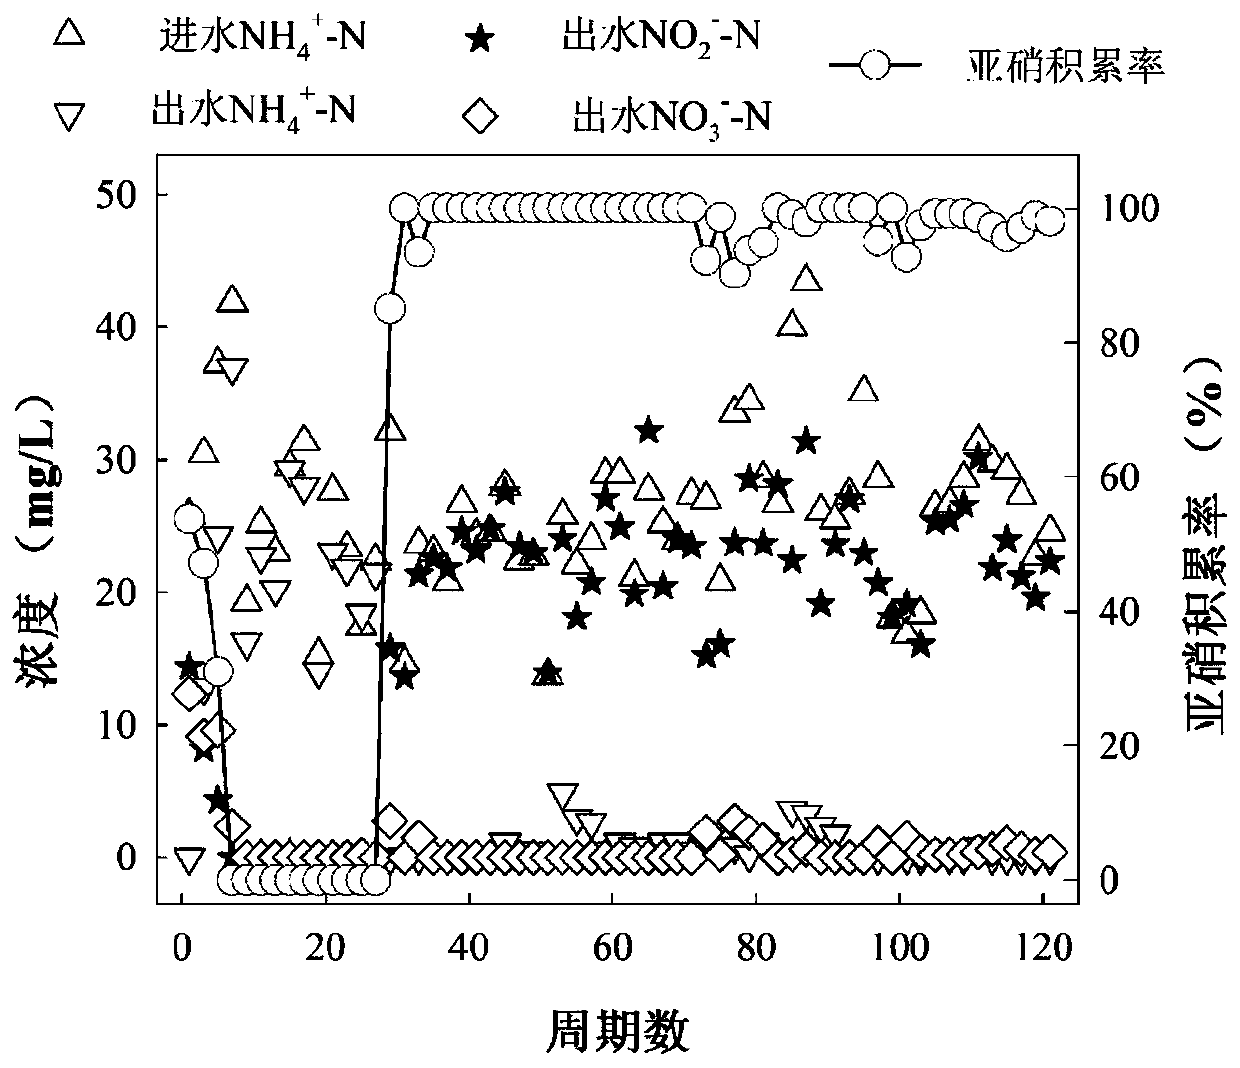 Method for rapidly starting normal-temperature short-cut nitrification of municipal sewage by benzethonium chloride